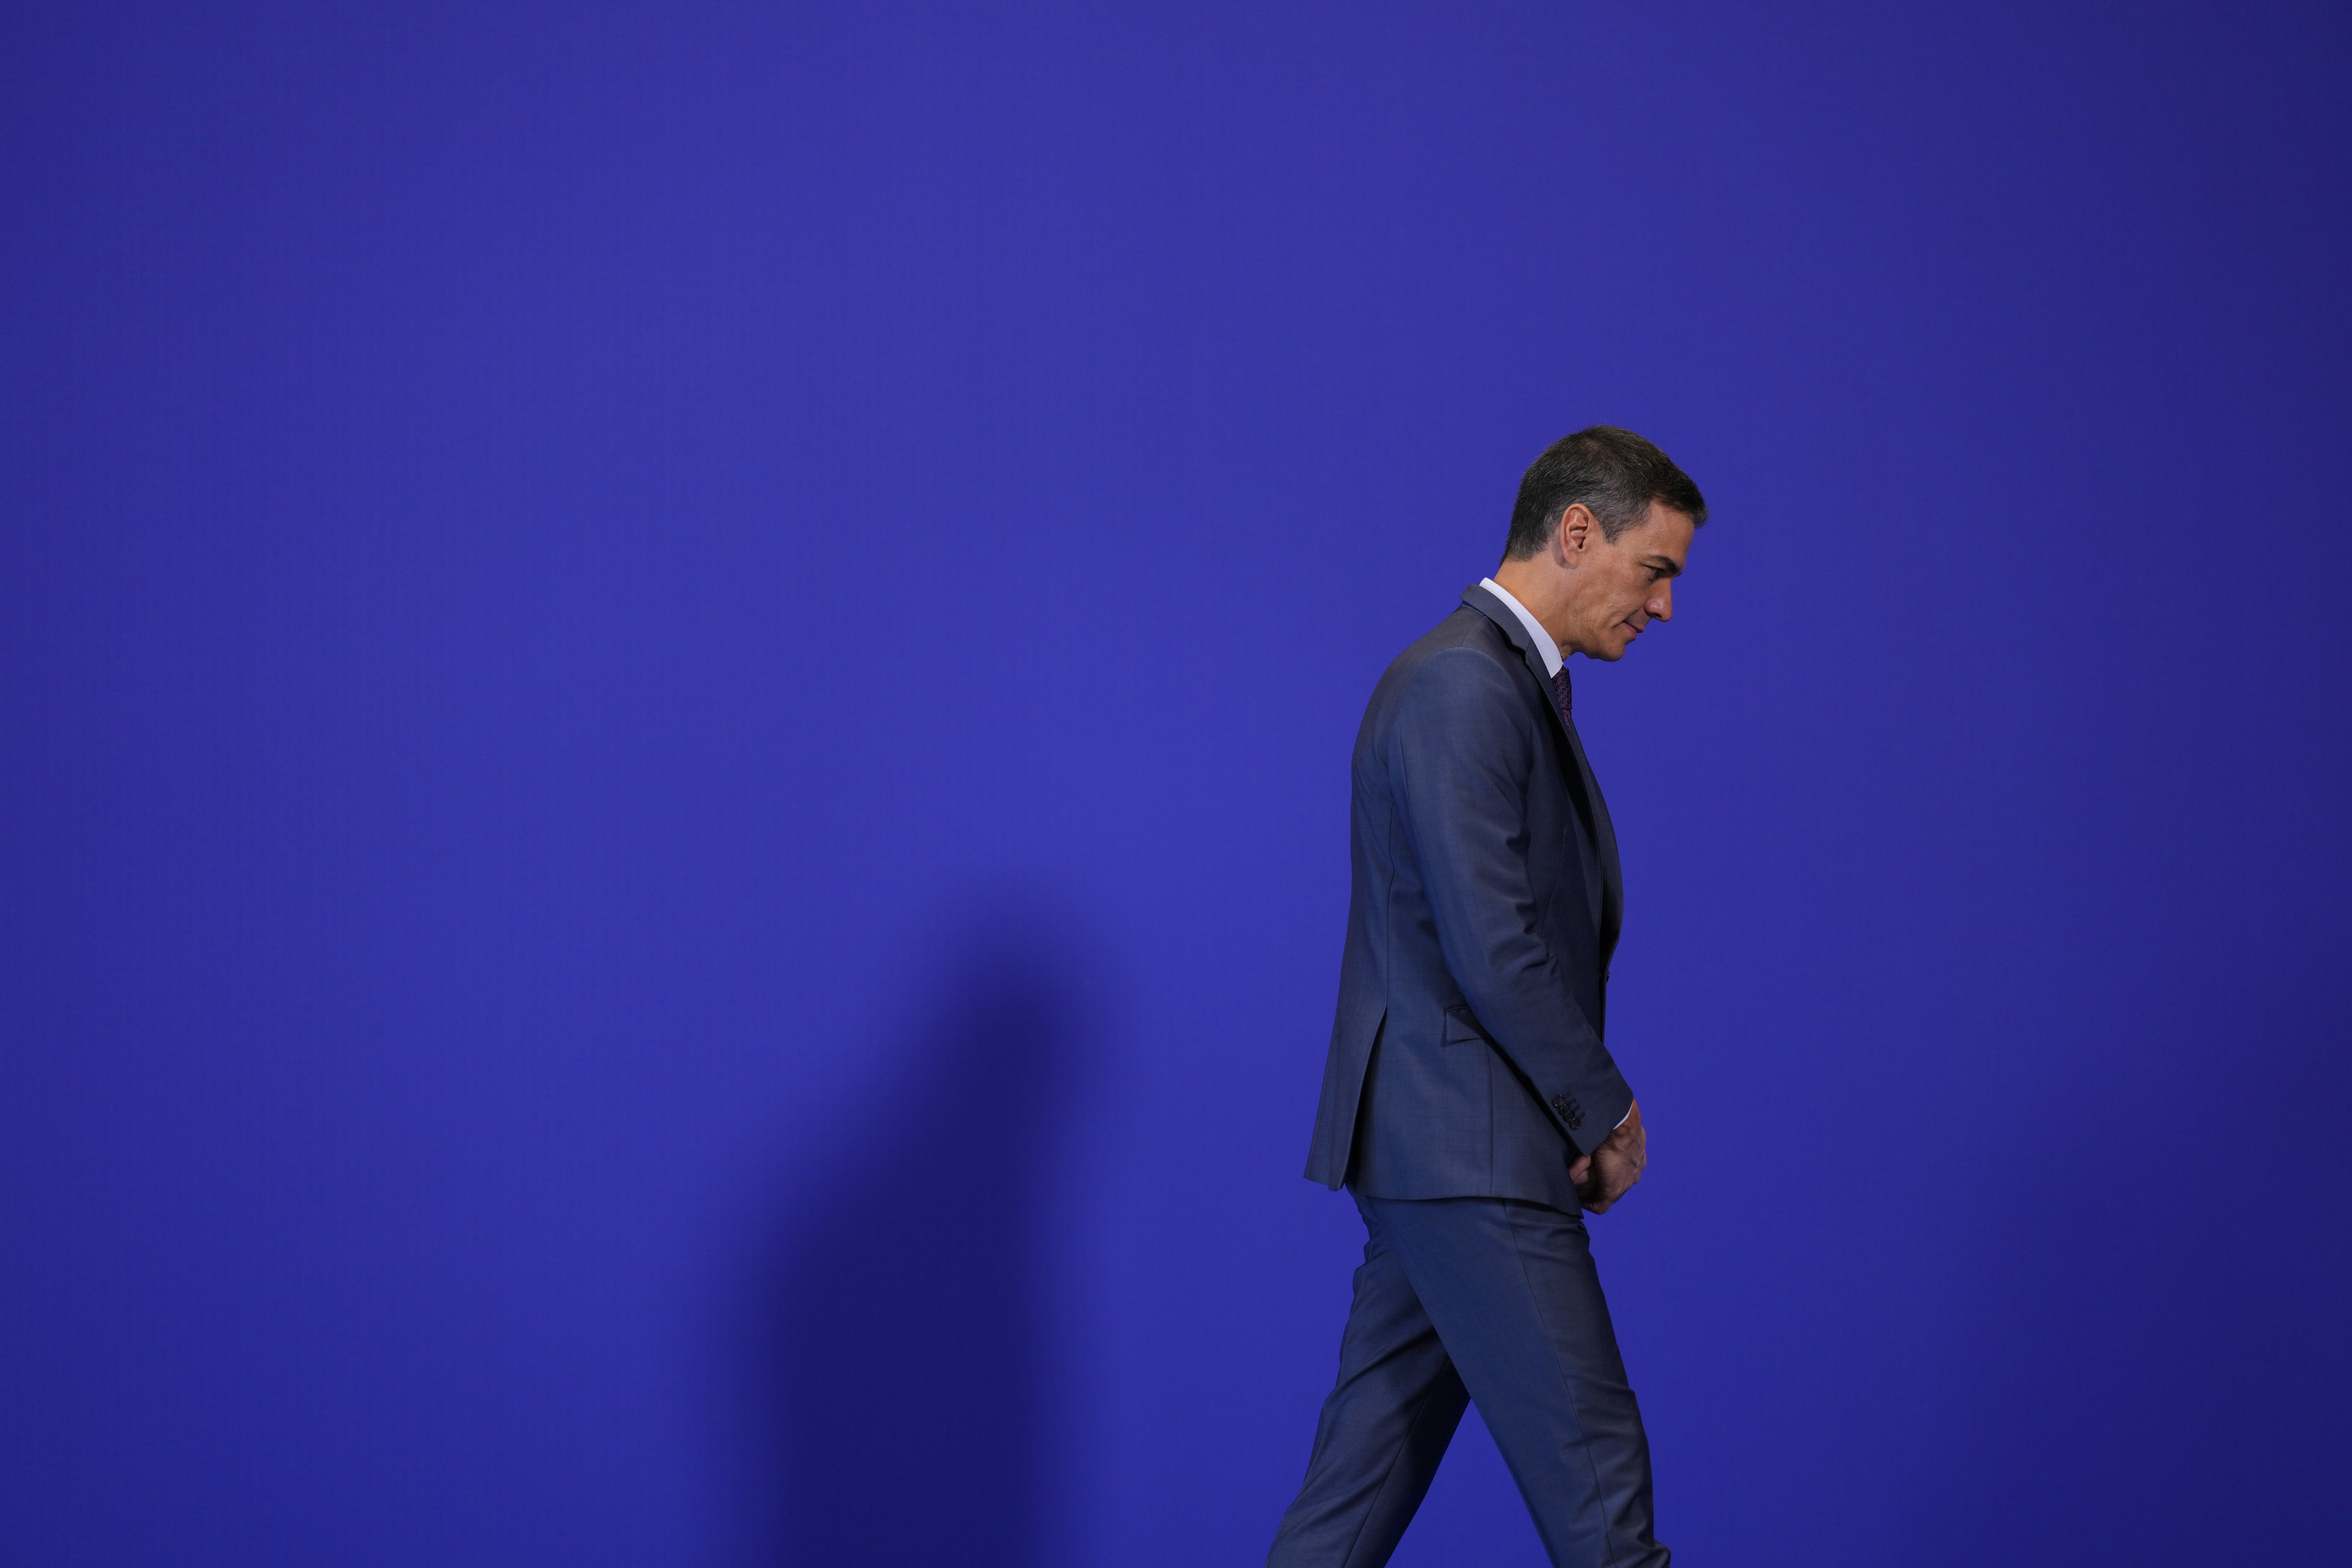 FILE - Spain's Prime Minister  lt;HIT gt;Pedro lt;/HIT gt;  lt;HIT gt;Sanchez lt;/HIT gt; walks at the Europe Summit in Granada, Spain, Oct. 6, 2023. Socialist Prime Minister  lt;HIT gt;Pedro lt;/HIT gt;  lt;HIT gt;Sanchez lt;/HIT gt; has left Spain in suspense on announcing he may step down because of what he called an "unprecedented" smear campaign against his wife.  lt;HIT gt;Sanchez lt;/HIT gt;, who has been in office since 2018, stunned all Wednesday April 24, 2024 by announcing that he was canceling all events until next week when he will unveil his future. (AP Photo/Manu Fernandez, File)